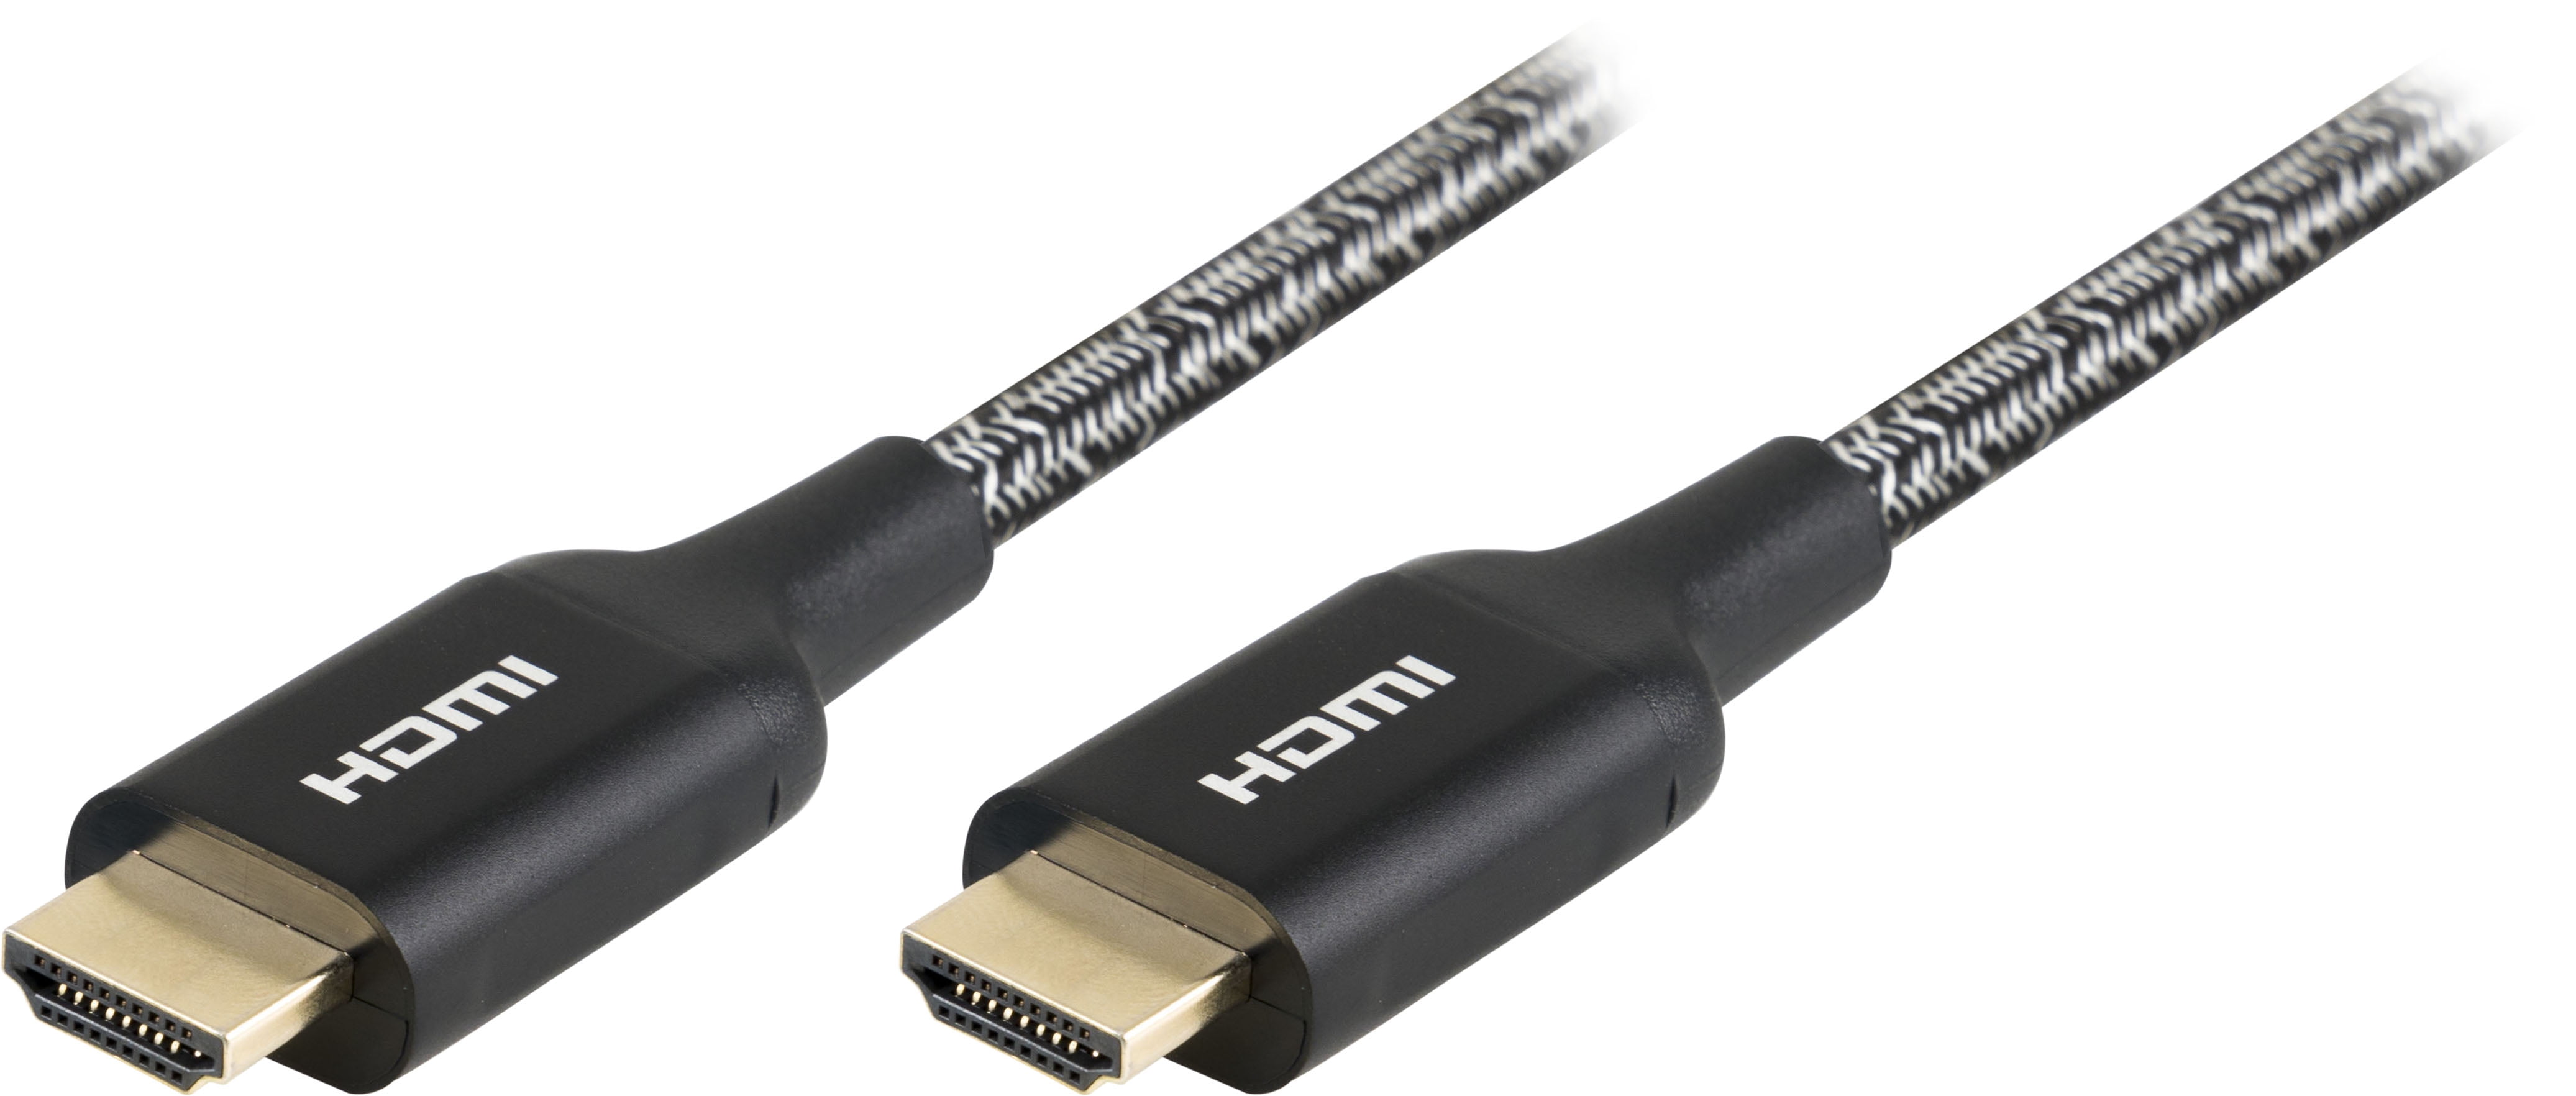 6 Lengths Braided Gold Plated Premium HDMI Cable 2.0 High Speed 